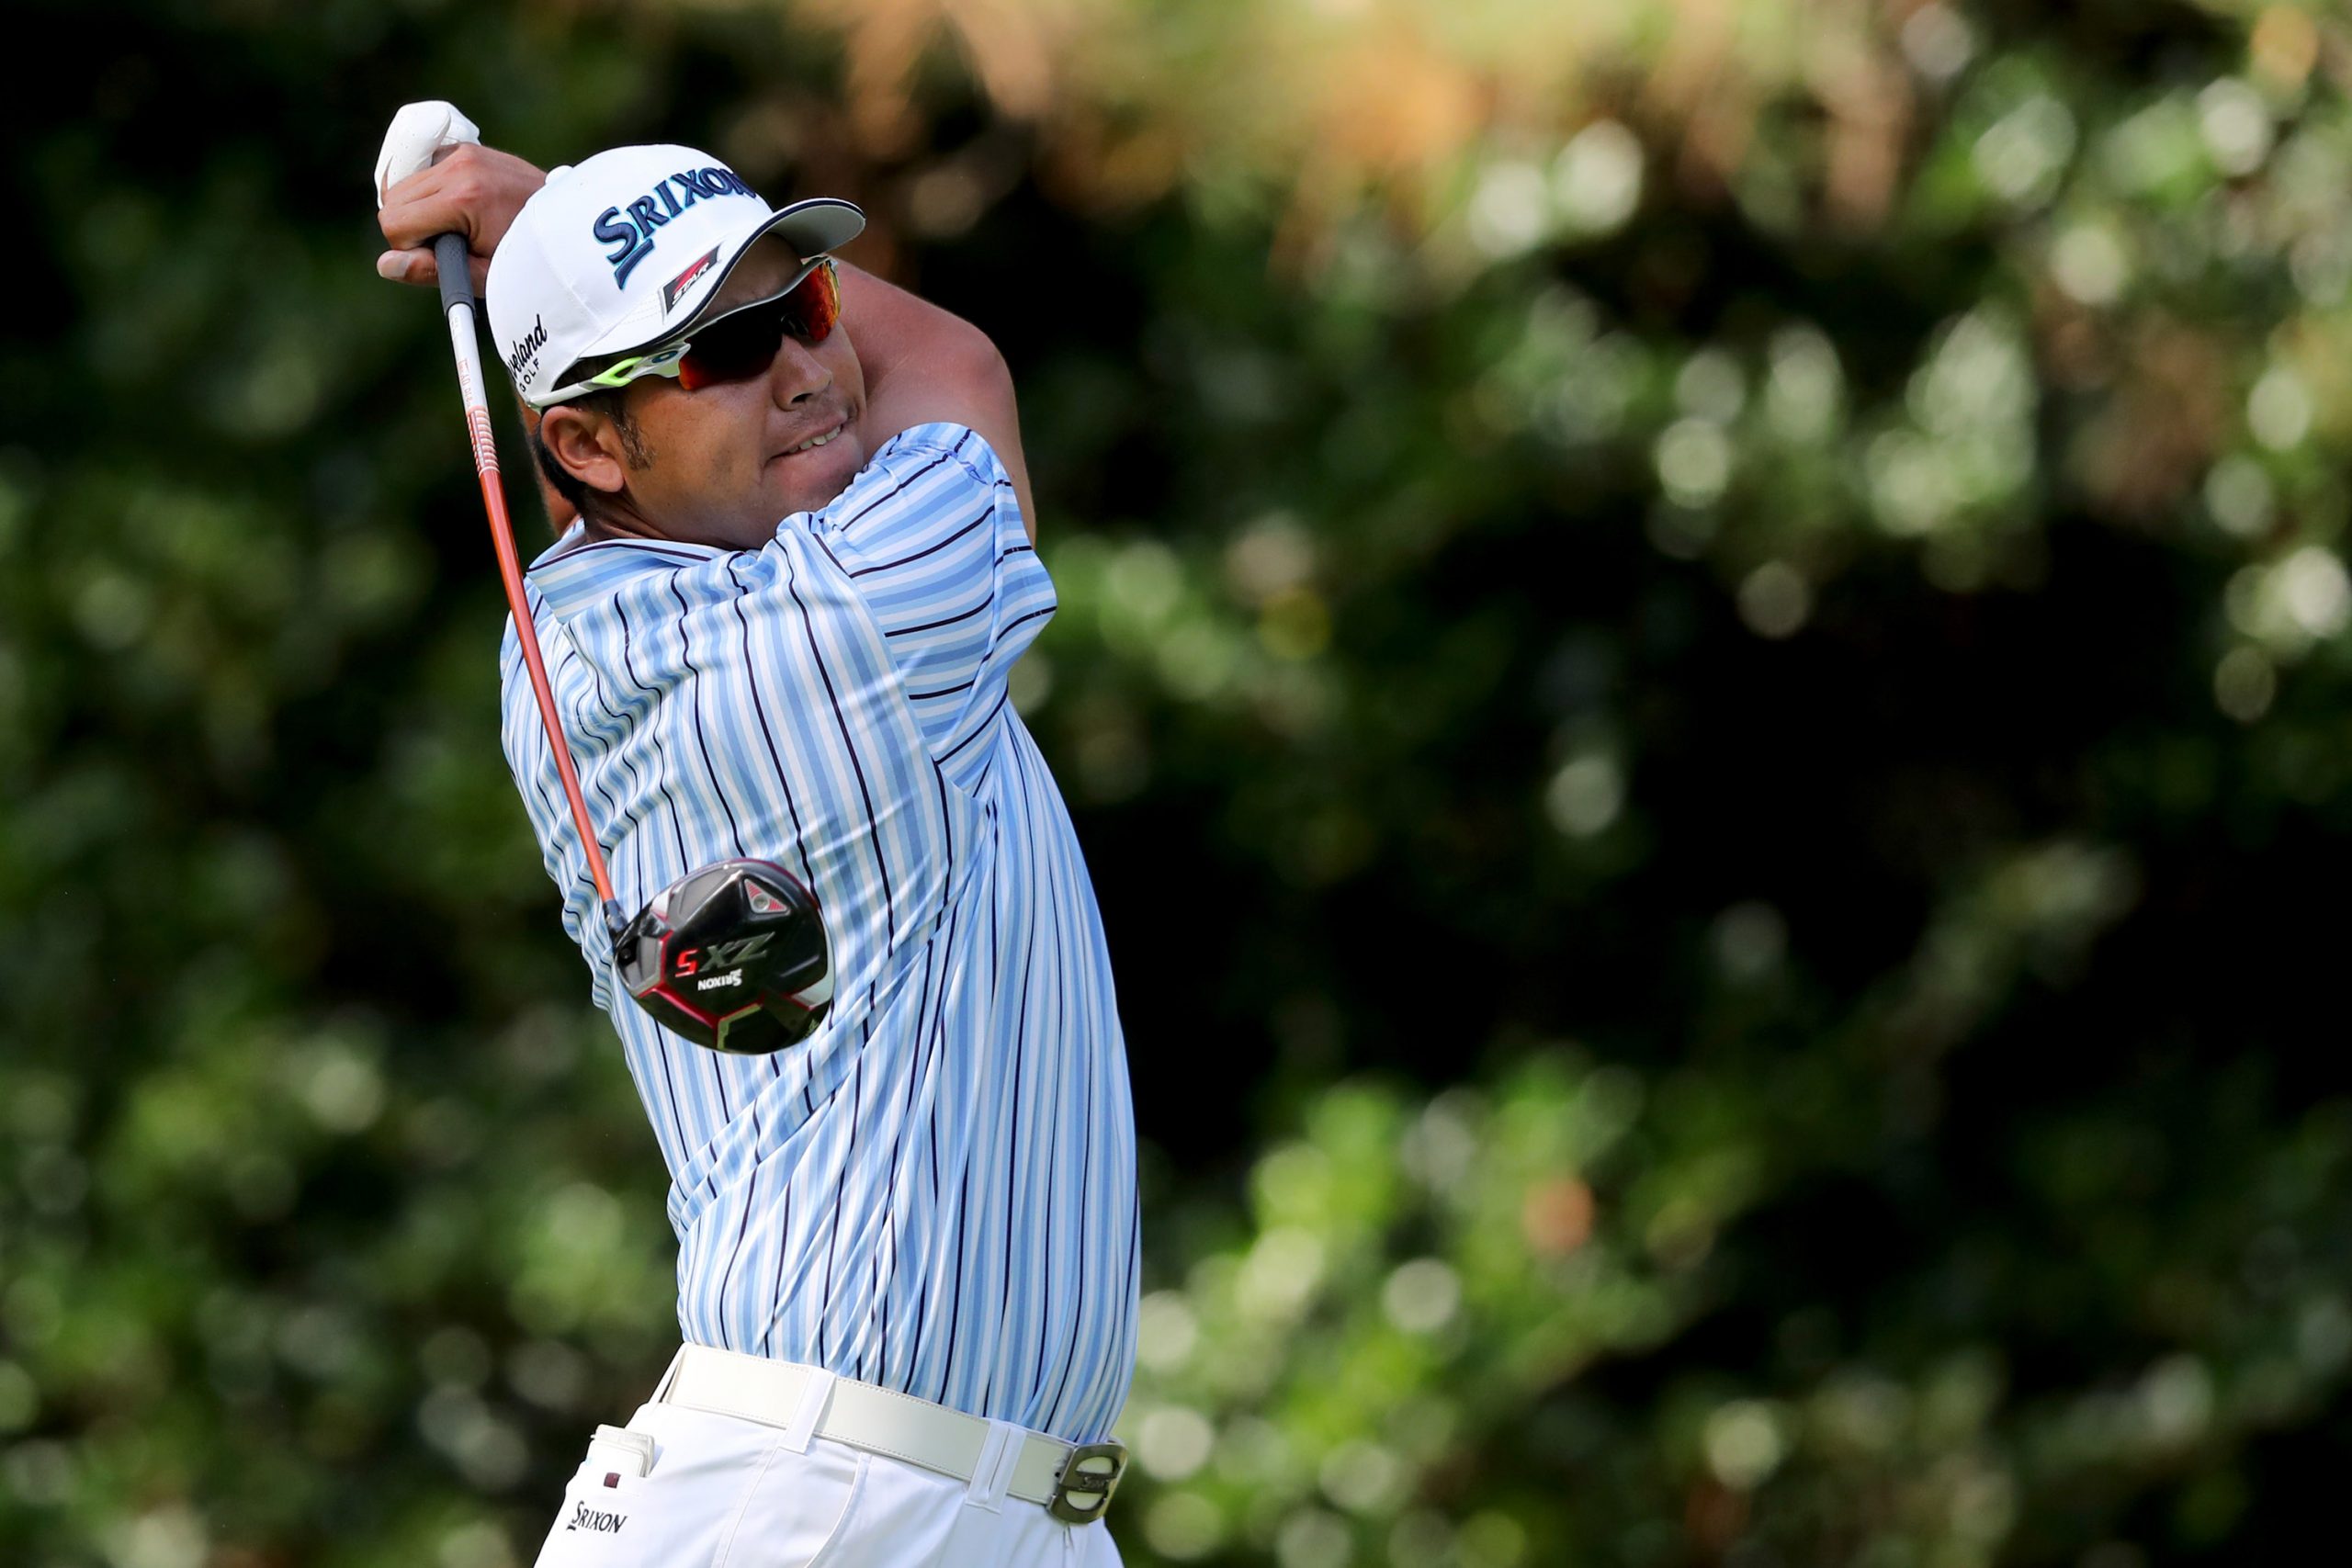 Hideki Matsuyama swings a golf club, his arms raised over his left shoulder and the golf club behind his back. he wears a white cap, sunglasses, a shirt with vertical light blue, white, and dark blue stripes, and white pants.